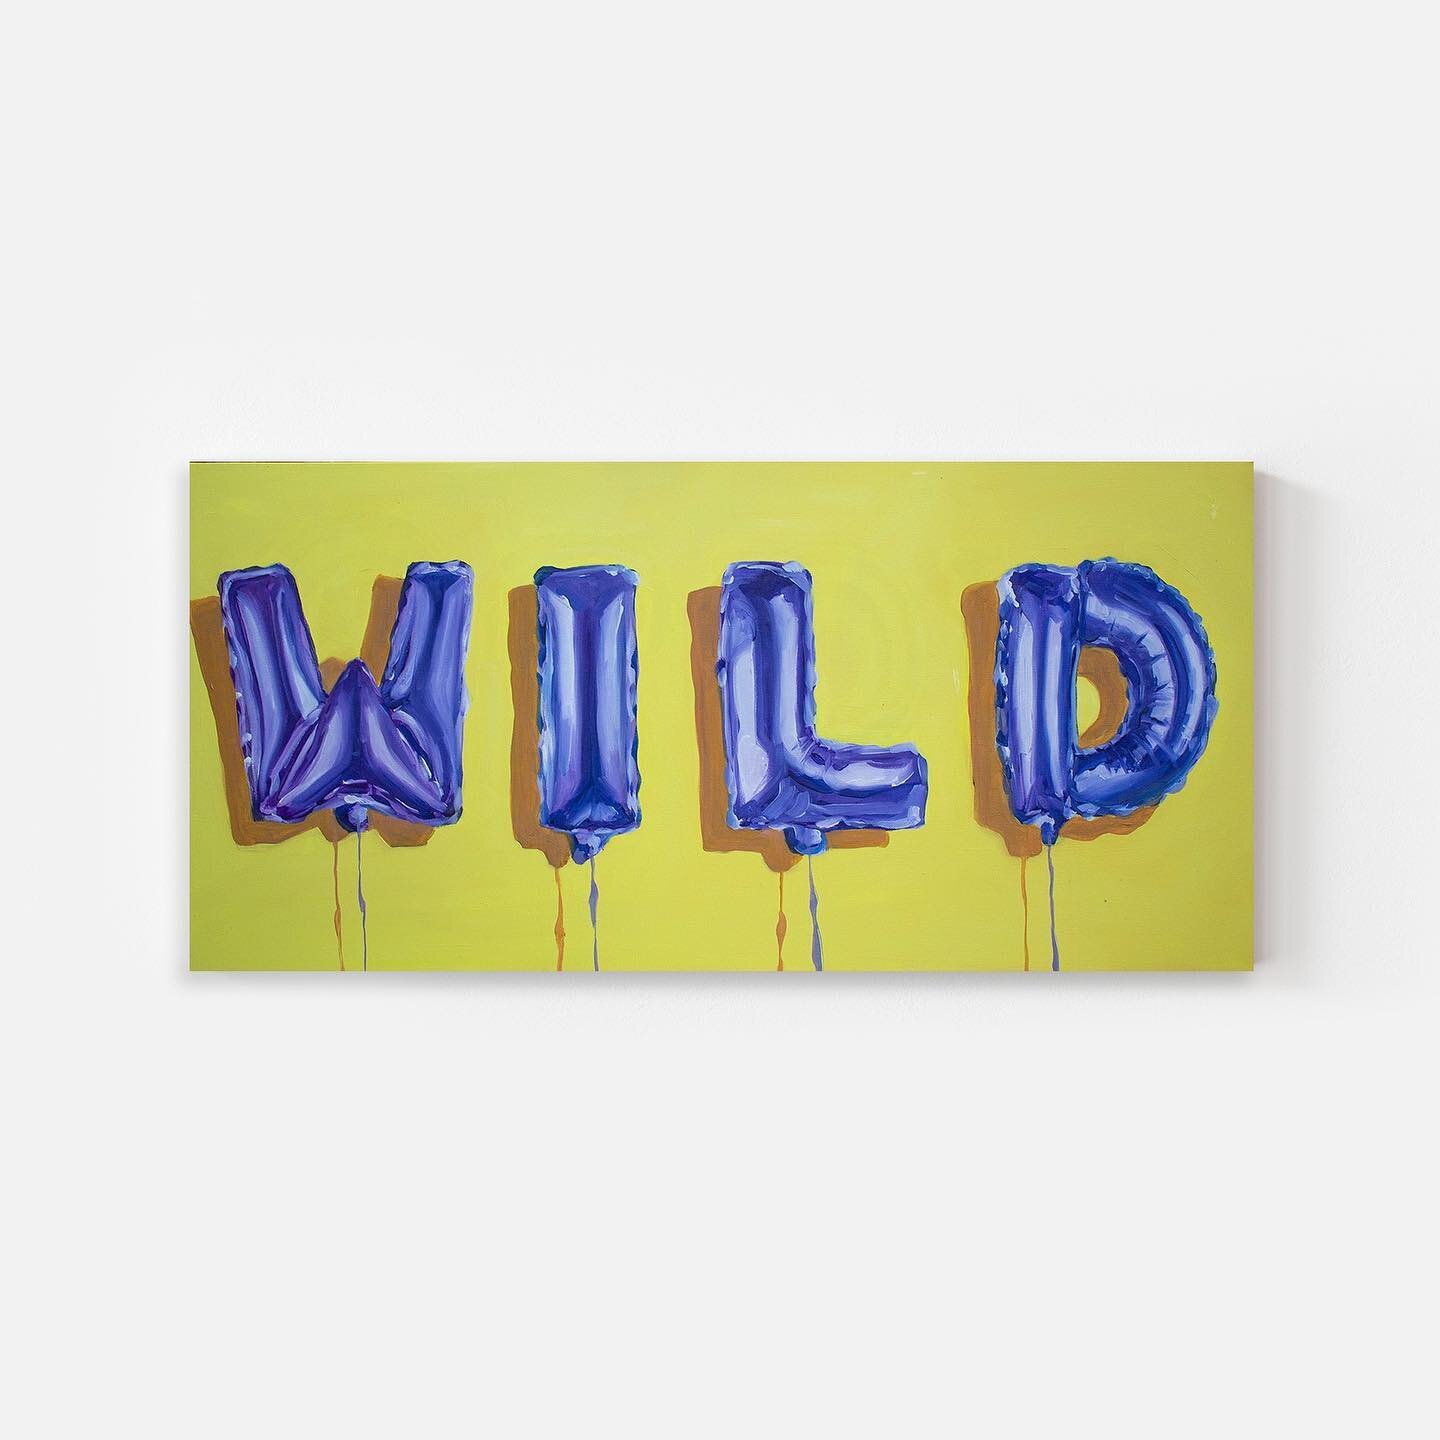 Growing wild and wise ~ onto a new year of making mistakes, learning, and growing. 🌼

&ldquo;You Drive Me Wild&rdquo; 
Oil paint on canvas 
36&rdquo; x 18&rdquo; 

Available for purchase 🌻⠀⠀⠀⠀⠀⠀⠀⠀⠀
.
.
.
.
.
.
.
.
.
#artbyalifutrell #wildchild #pai